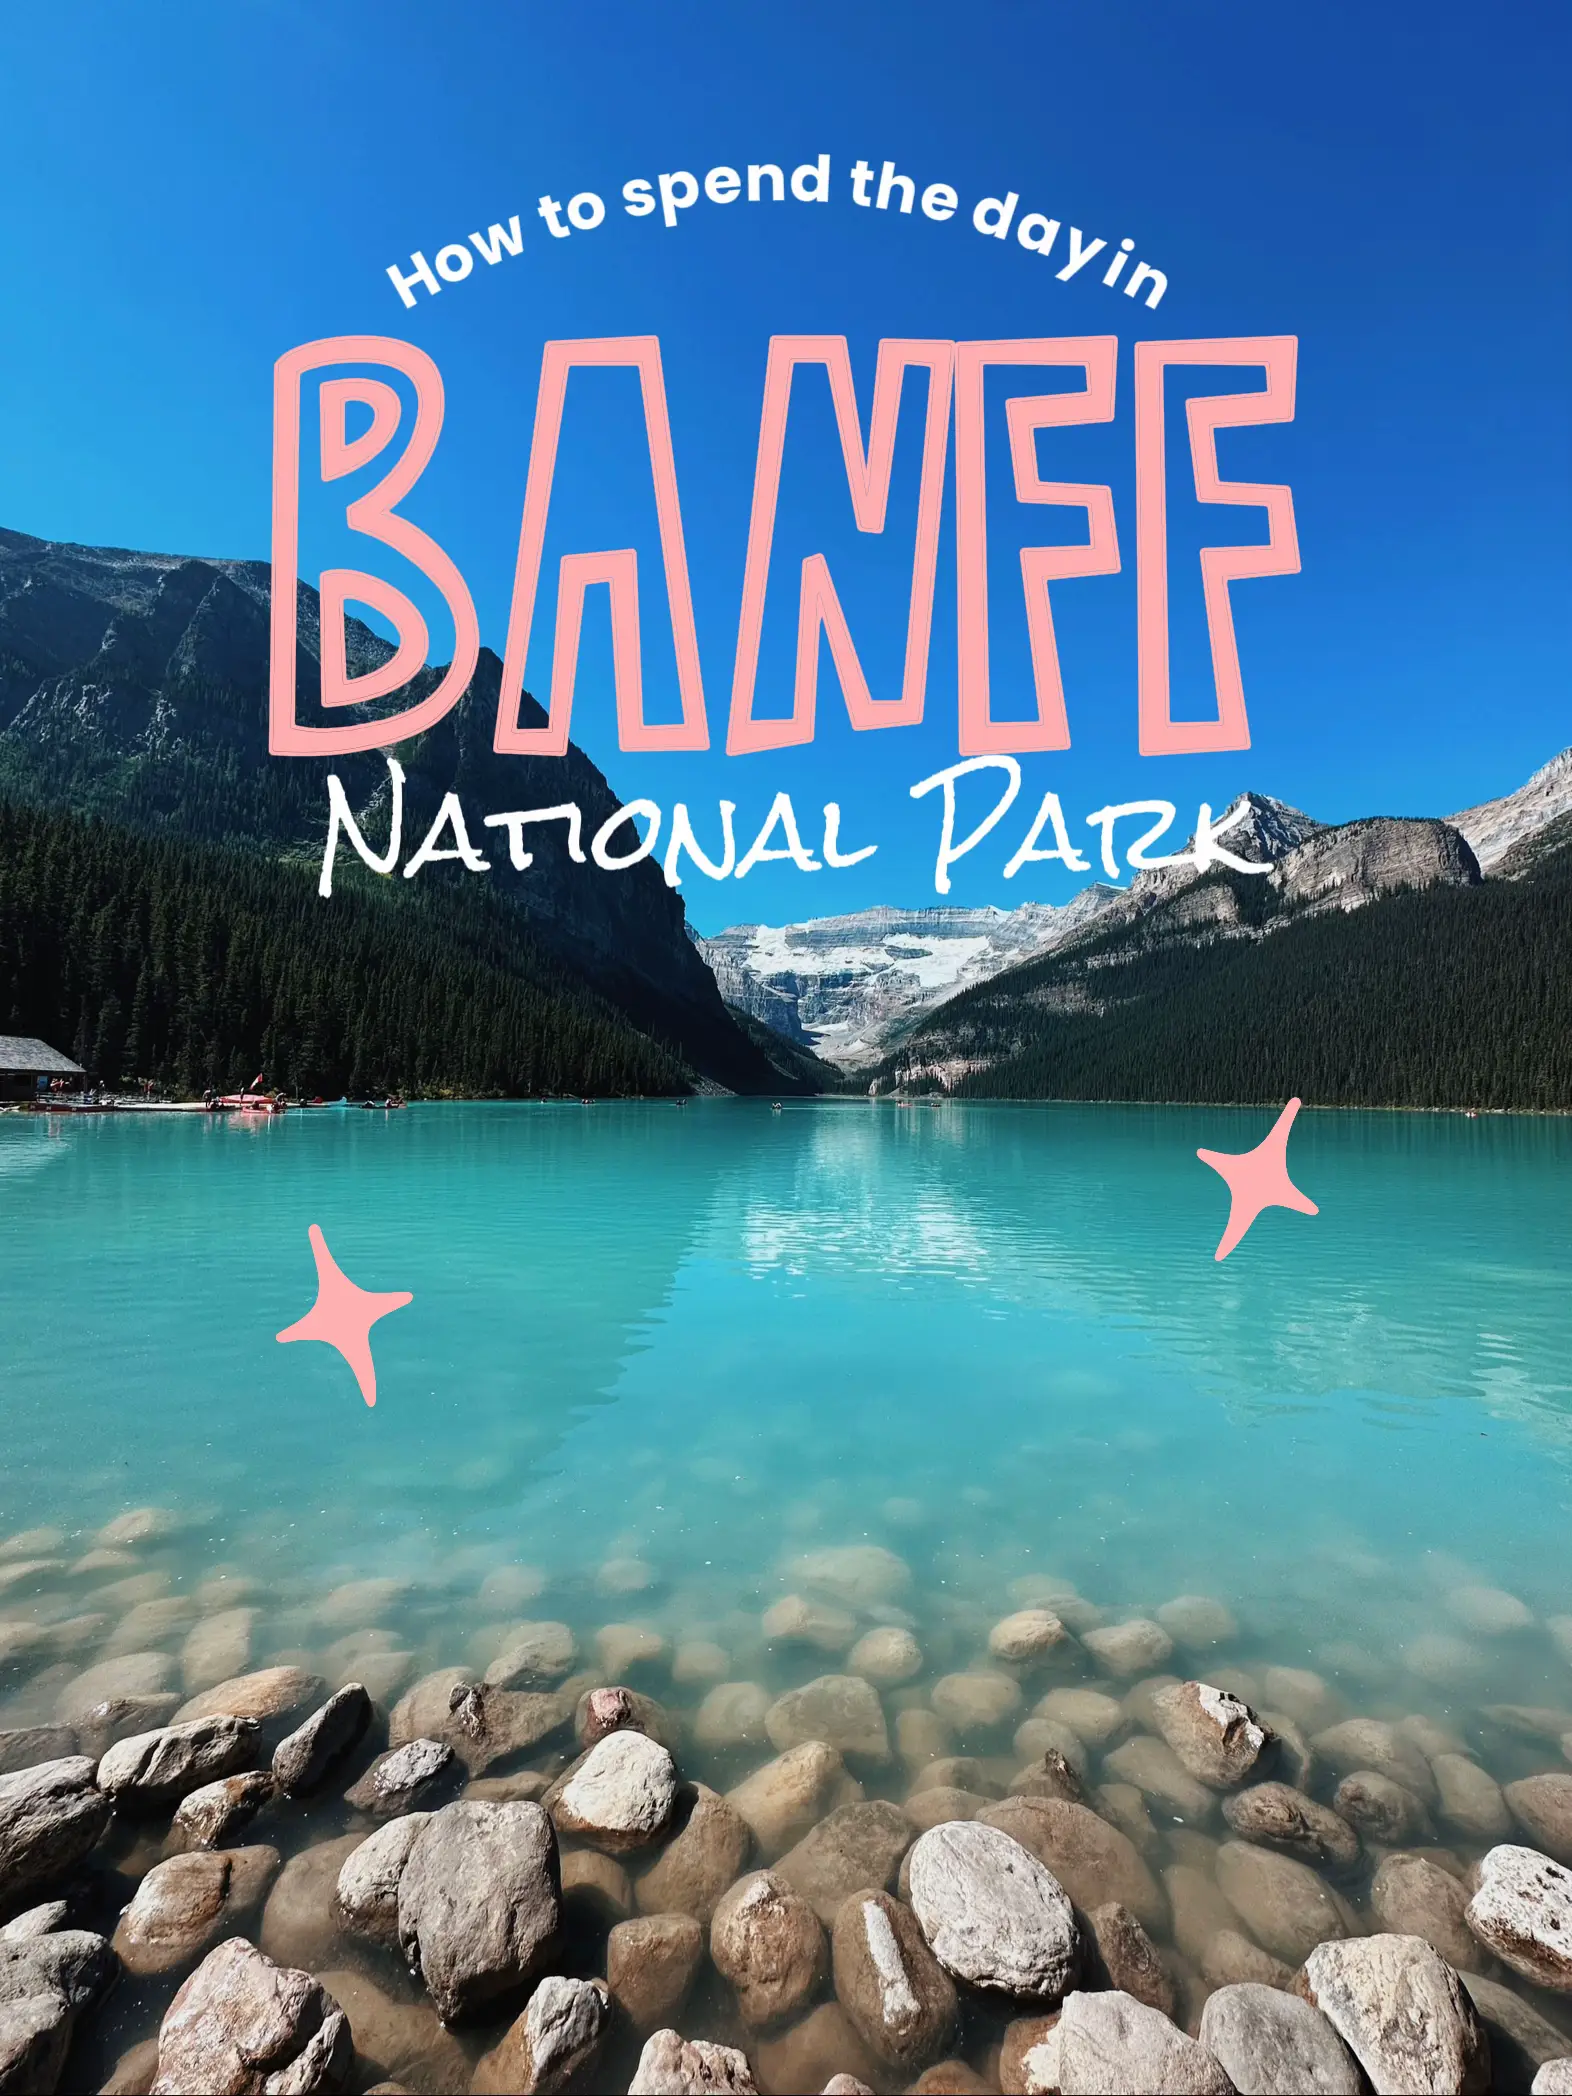 How To Spend The Day In Banff National Park, Gallery posted by  mletraveldiary